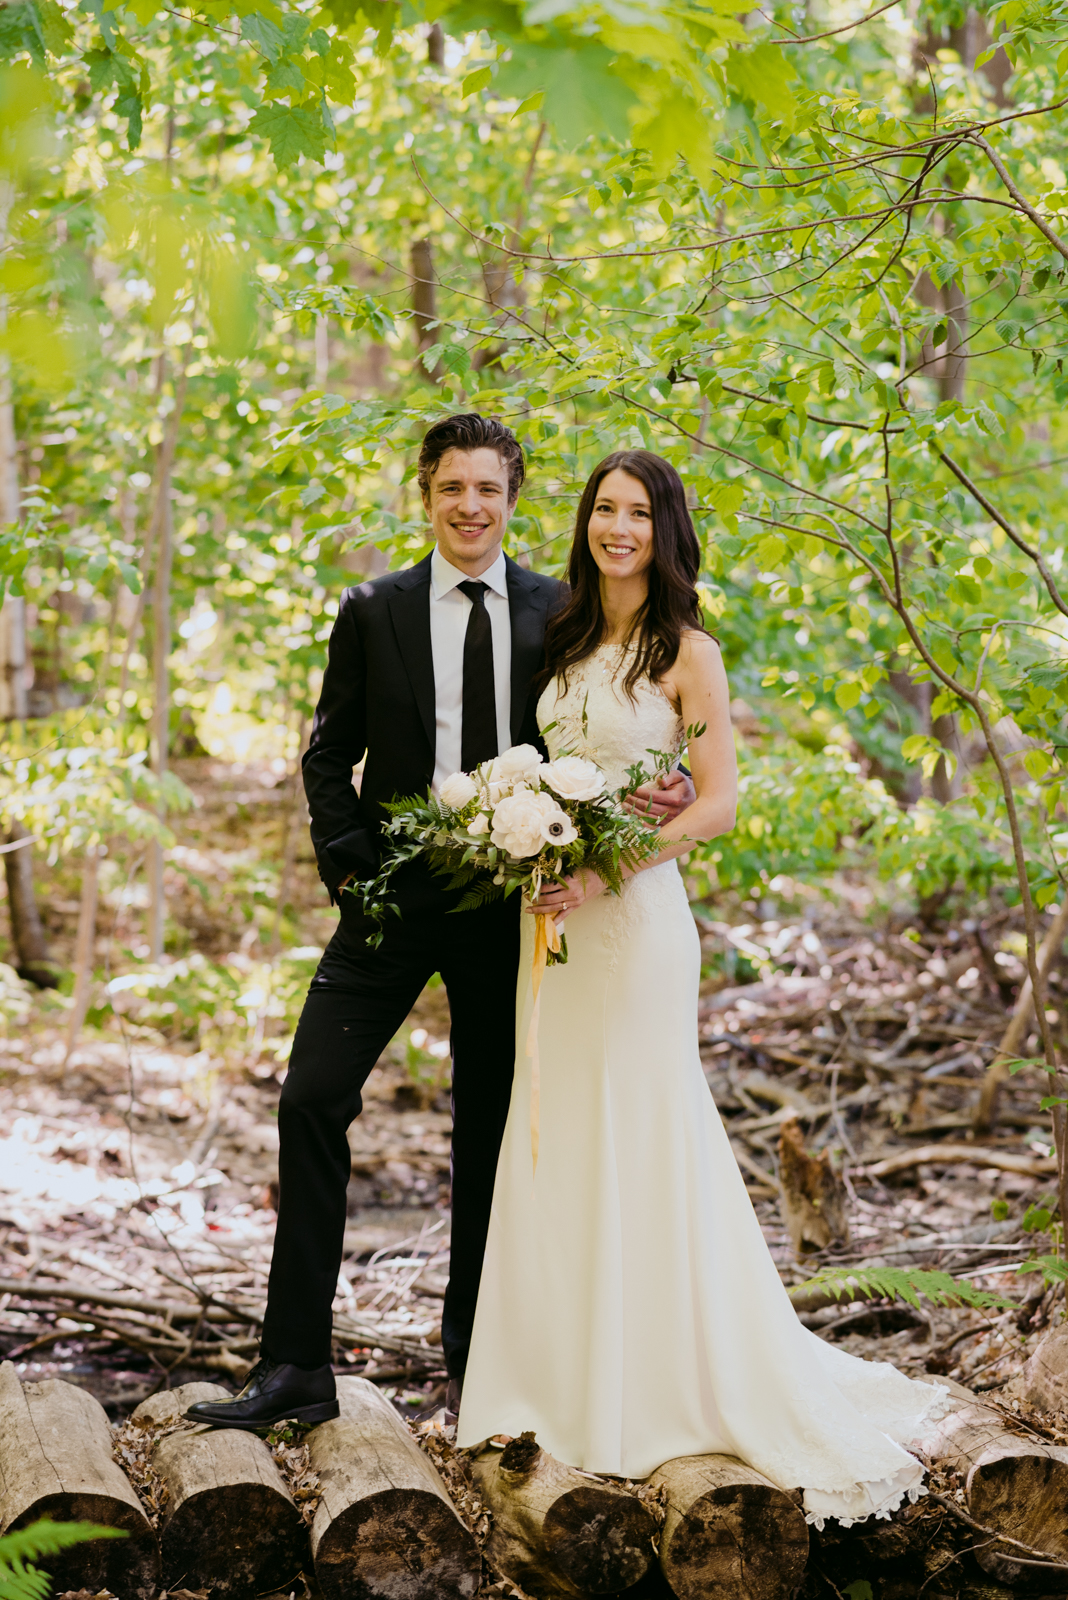 bride and groom standing on wooden logs in a forest smiling at the camera